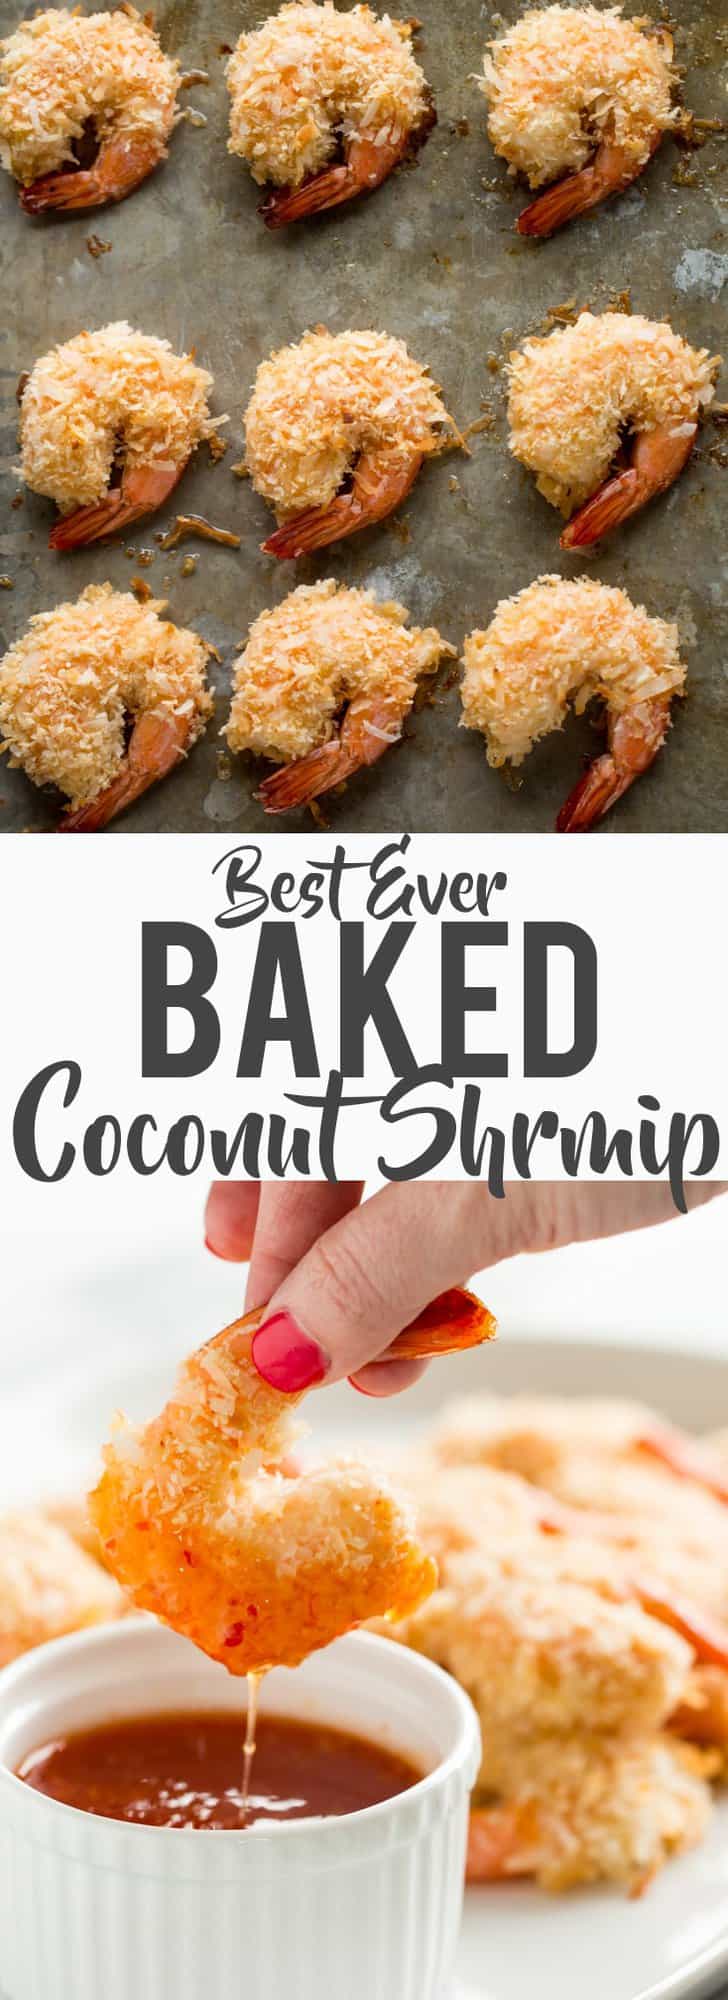 These Baked Coconut Shrimp are golden, crispy and full of flavor. You won't even need a dipping sauce! These are the BEST baked coconut shrimp I have ever made! | How to make coconut shrimp | Baked coconut shrimp | skinny coconut shrimp | 